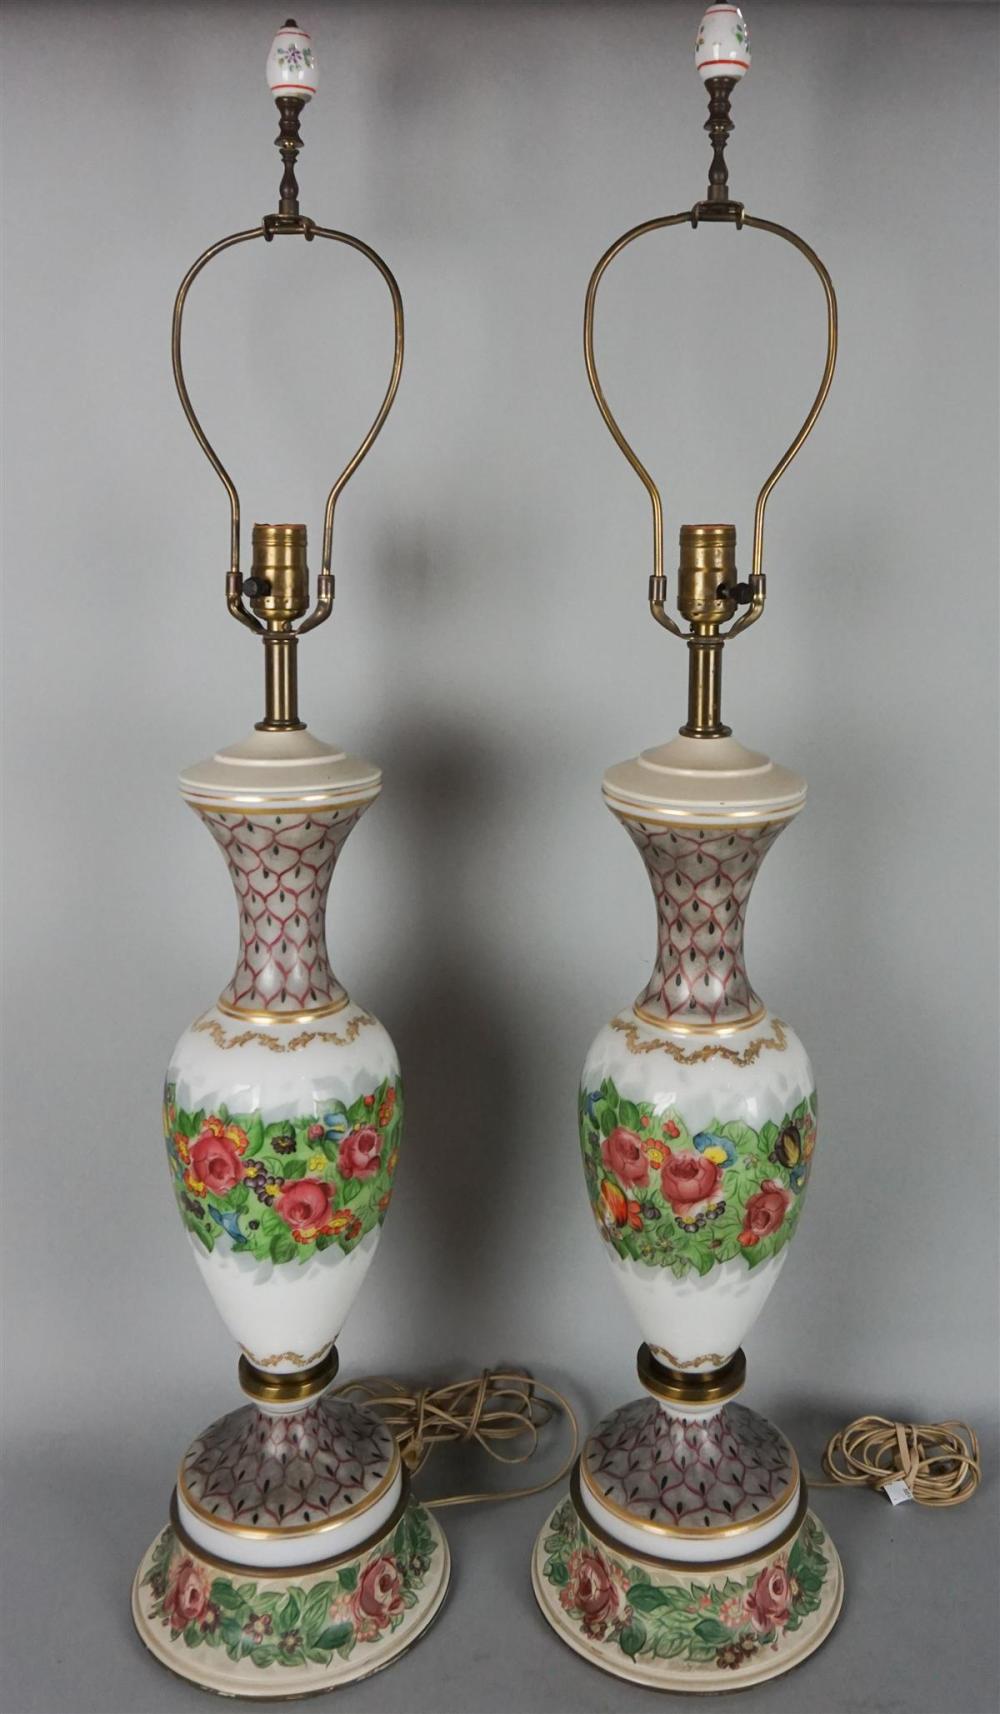 PAIR OF ENAMELED GLASS VASES, NOW